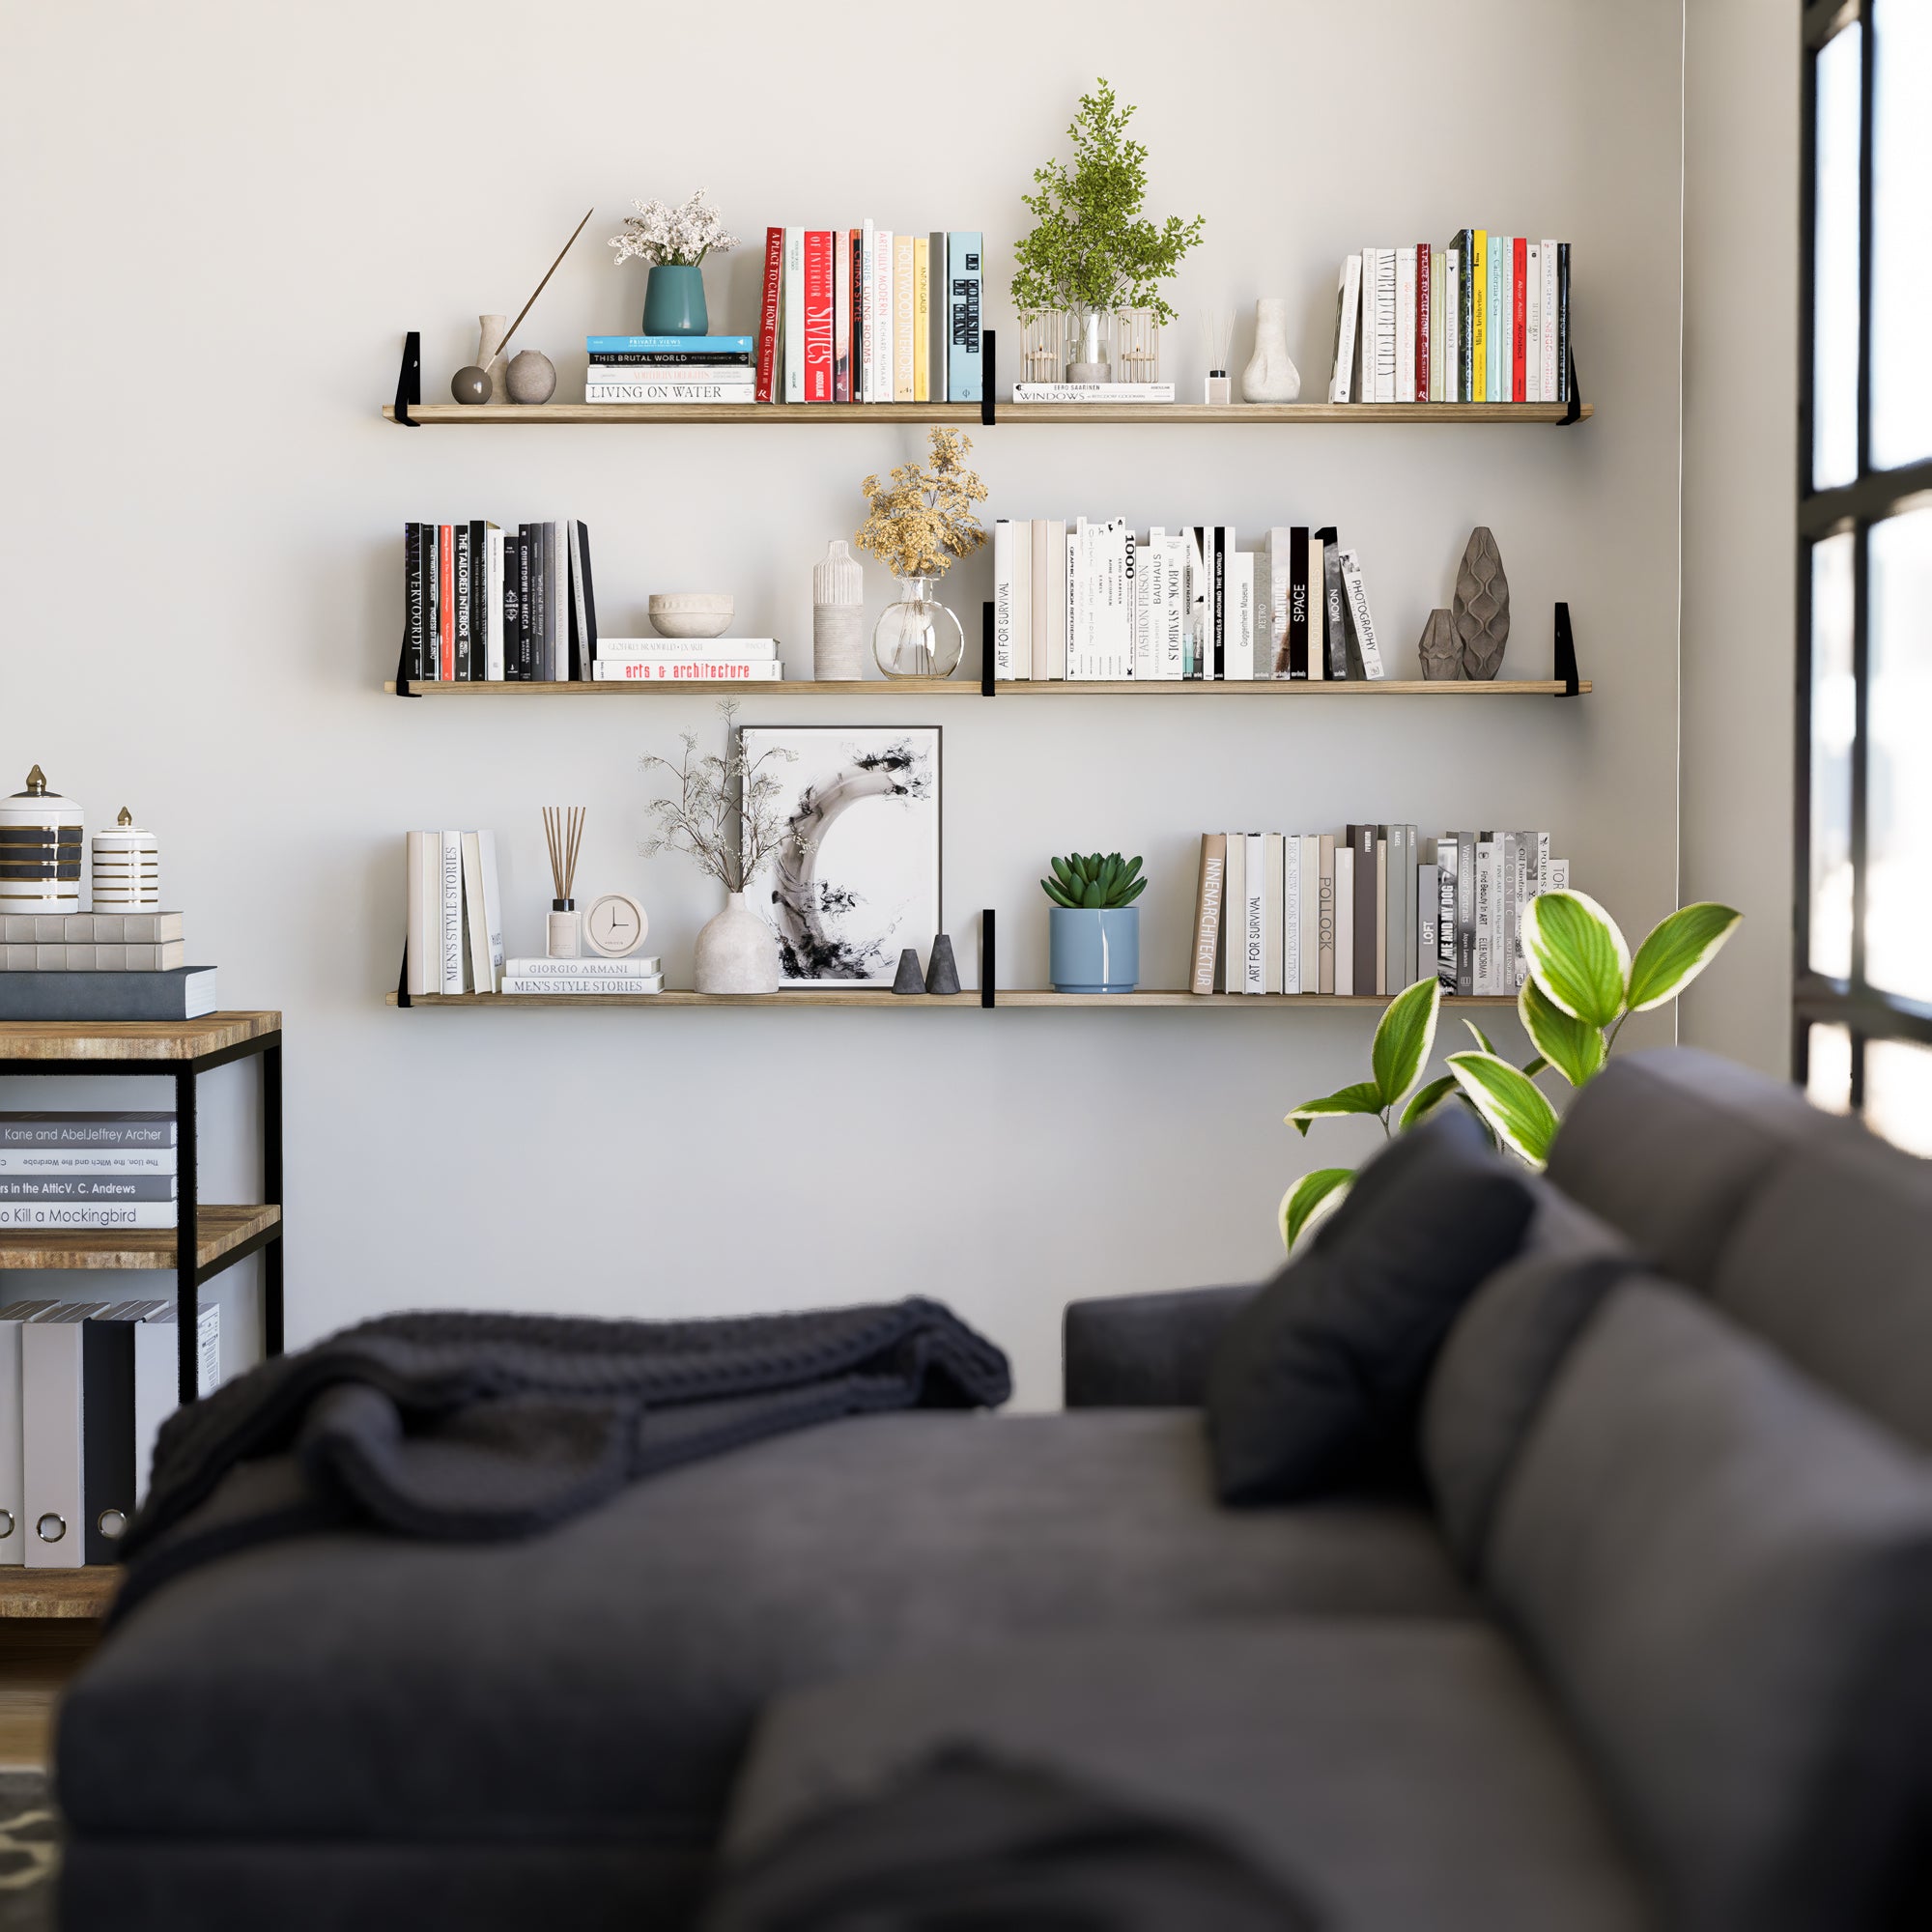 Spacious living room with multiple wall shelves for living room filled with books and decorative items, offering a cozy and stylish space.